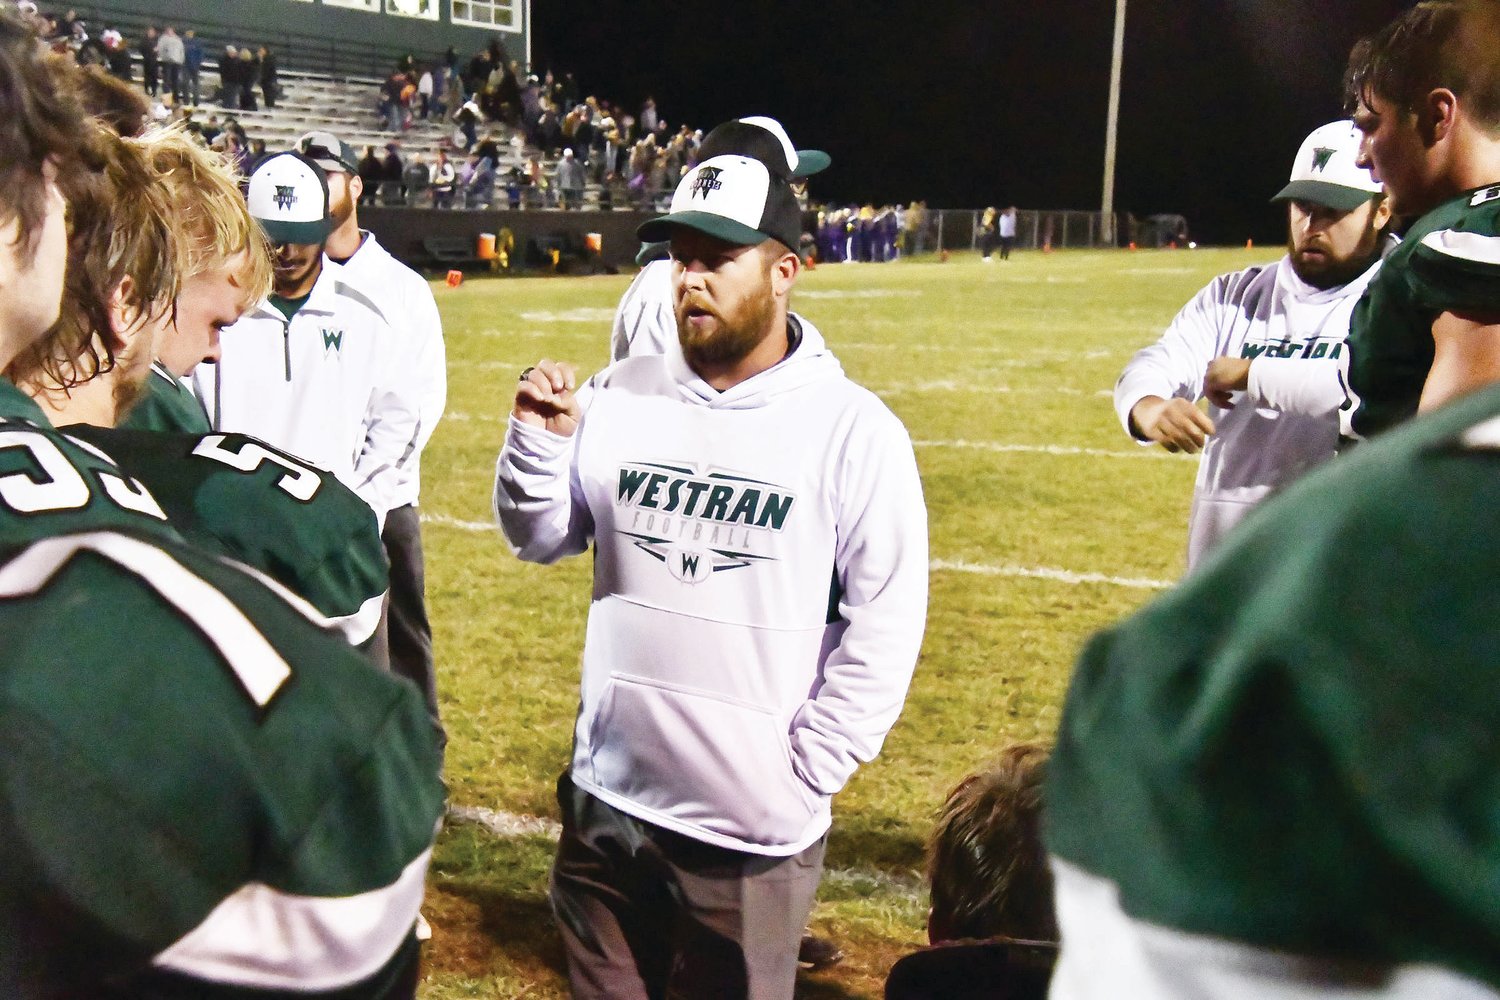 Westran head football coach Aaron O'Laughlin talks to his team after the Hornets defeated Salisbury during the opening round of the Class 1 playoffs on Thursday, Oct. 27, 2022, in Huntsville. O'Laughlin announced his resignation last Tuesday after five years.